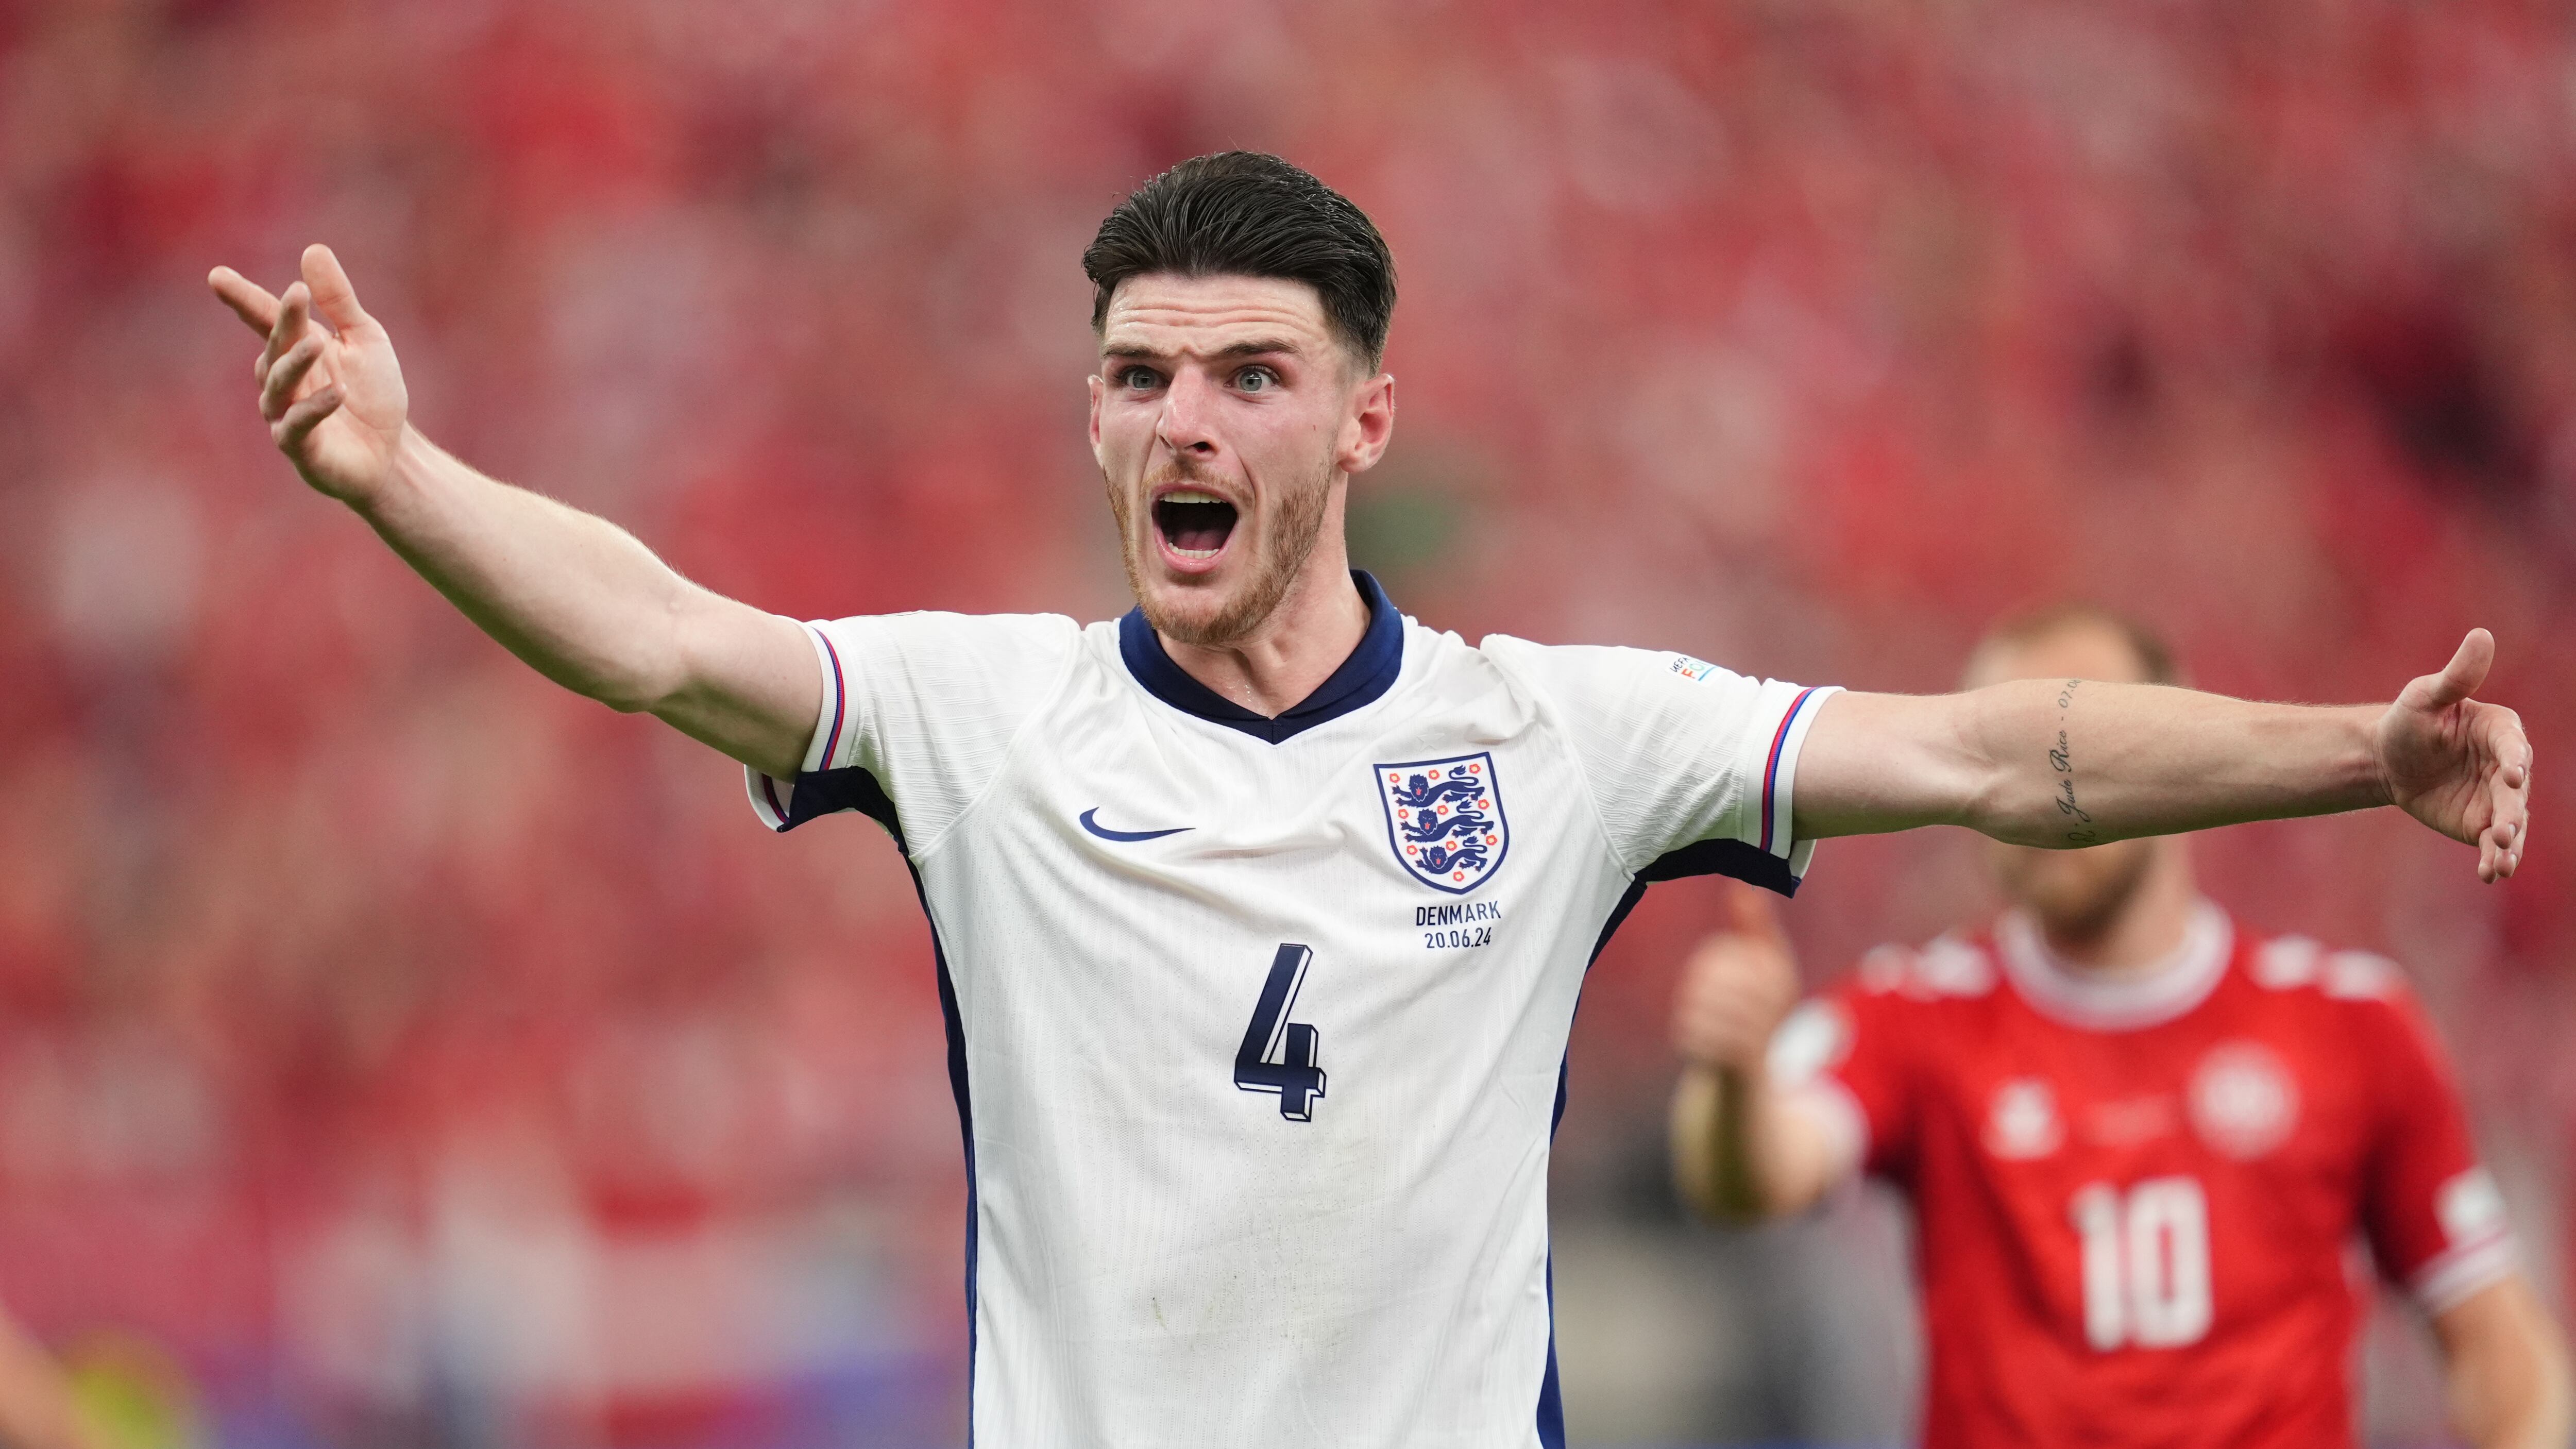 Declan Rice refuted claims that England’s players are exhausted after demanding club campaigns